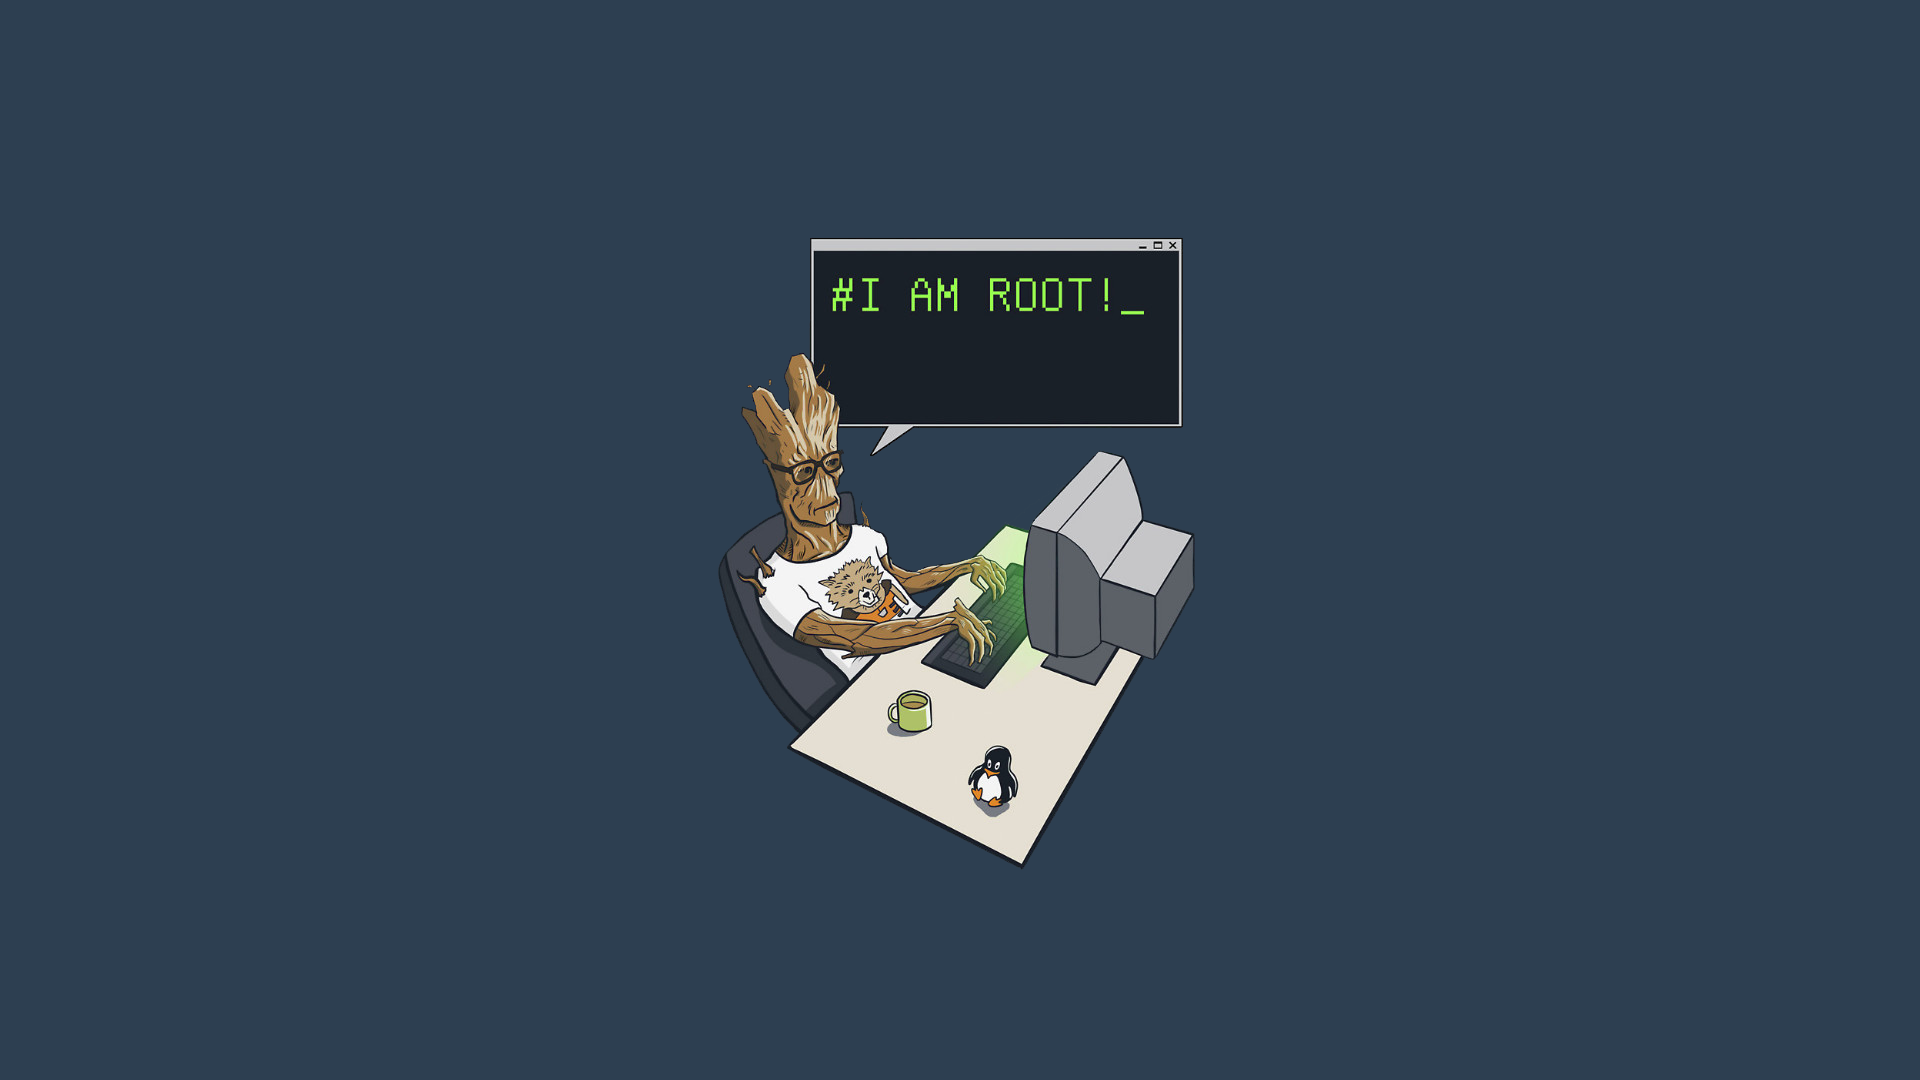 General 1920x1080 Linux sudo Groot Root Arch Linux humor